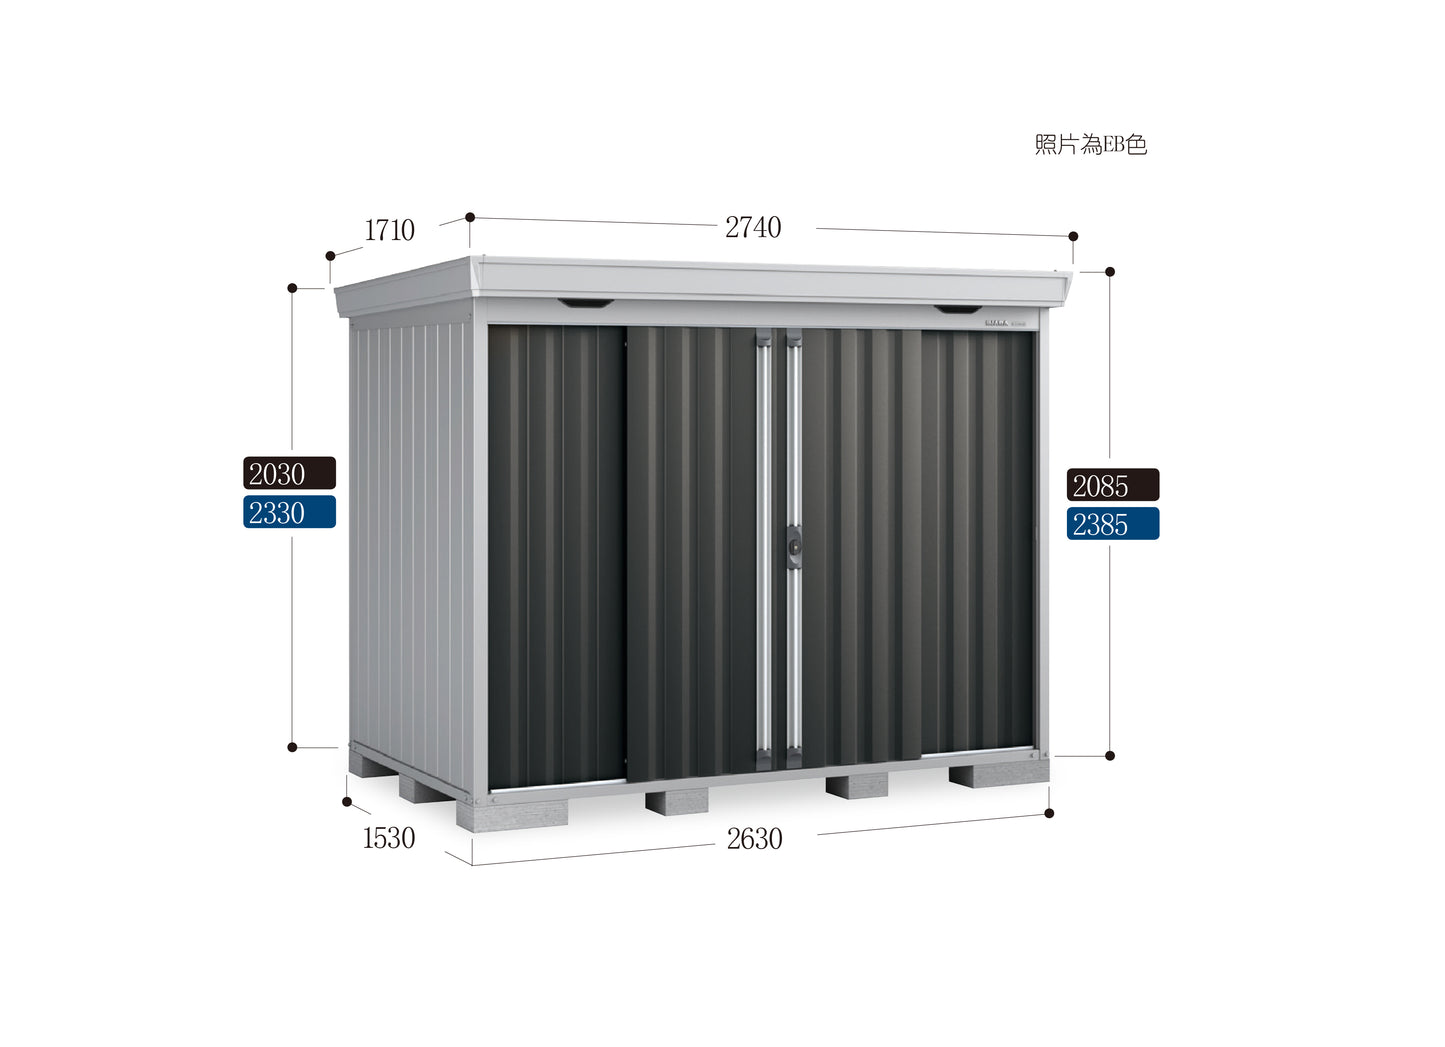 *Pre-order* Inaba Outdoor Storage FS-2615 (W2740xD1710xH2085/2385mm)